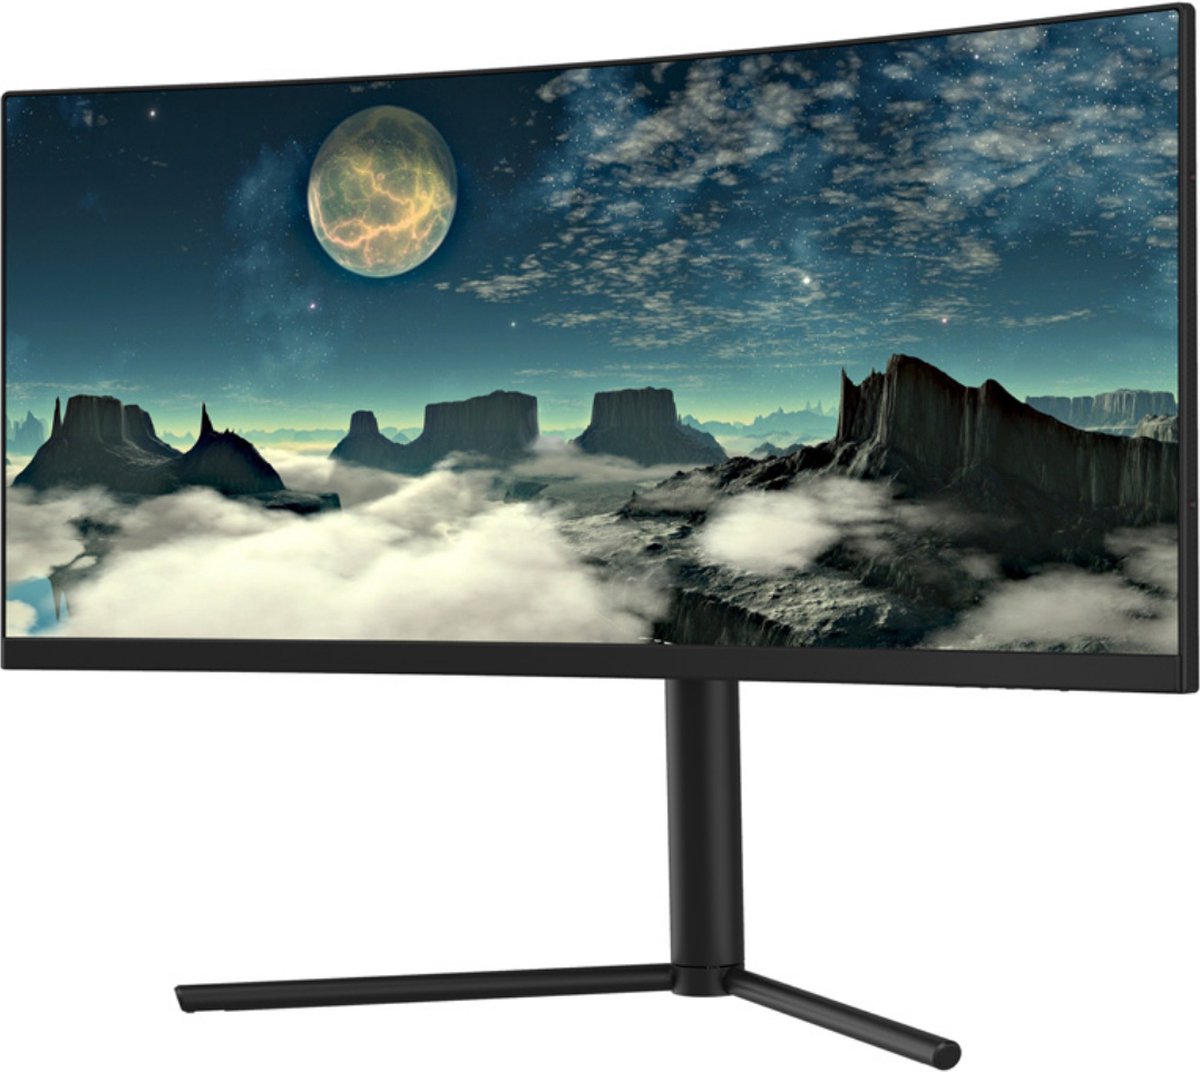 Game Hero LCP - 29 inch Curved PC Monitor - Full HD - Free Sync - Gaming Monitor - 100 Hz - 21:9 Ultra-Wide Widescreen